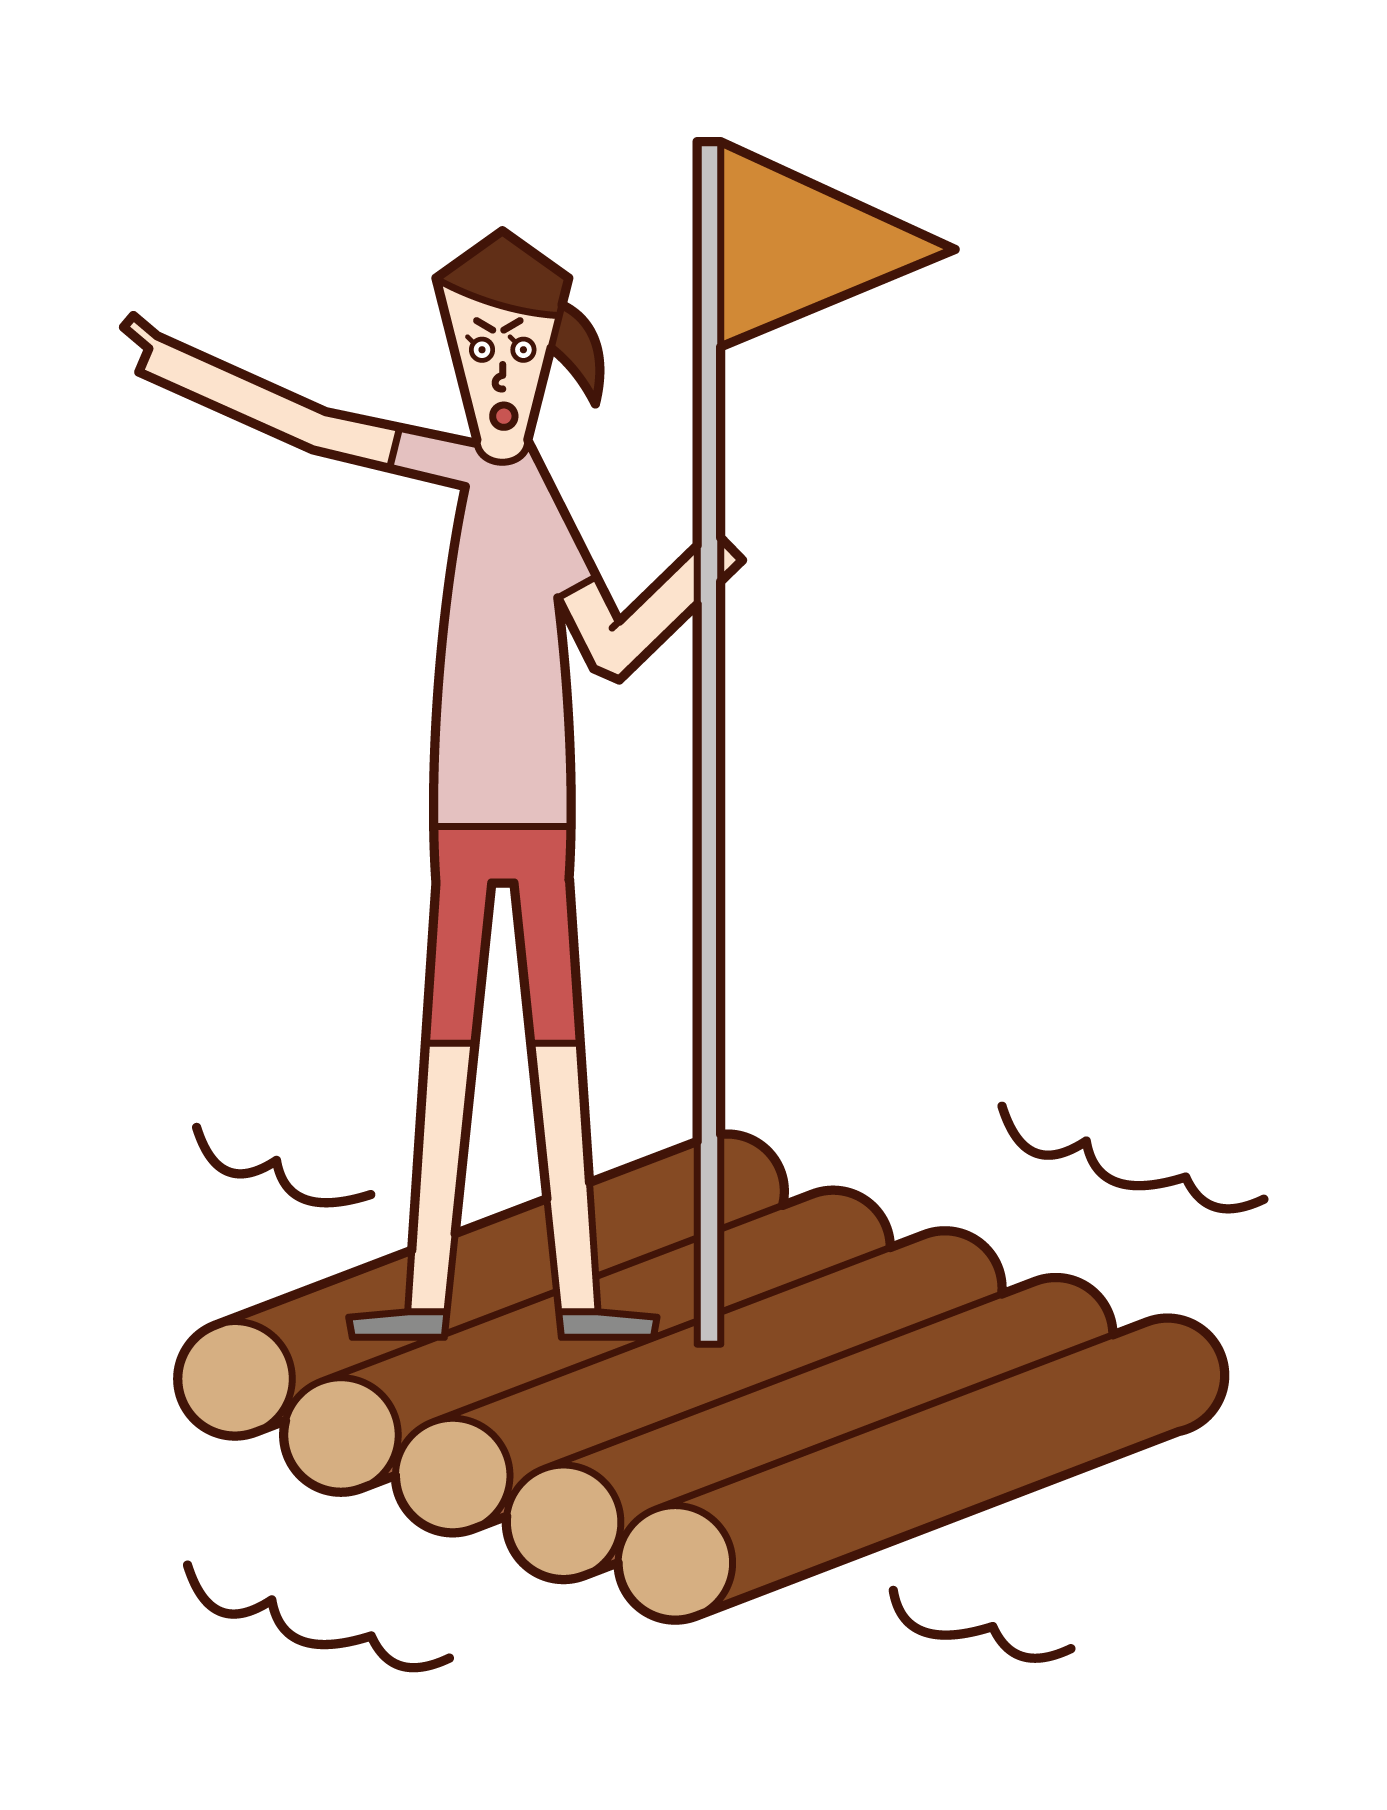 Illustration of a man traveling on a raft